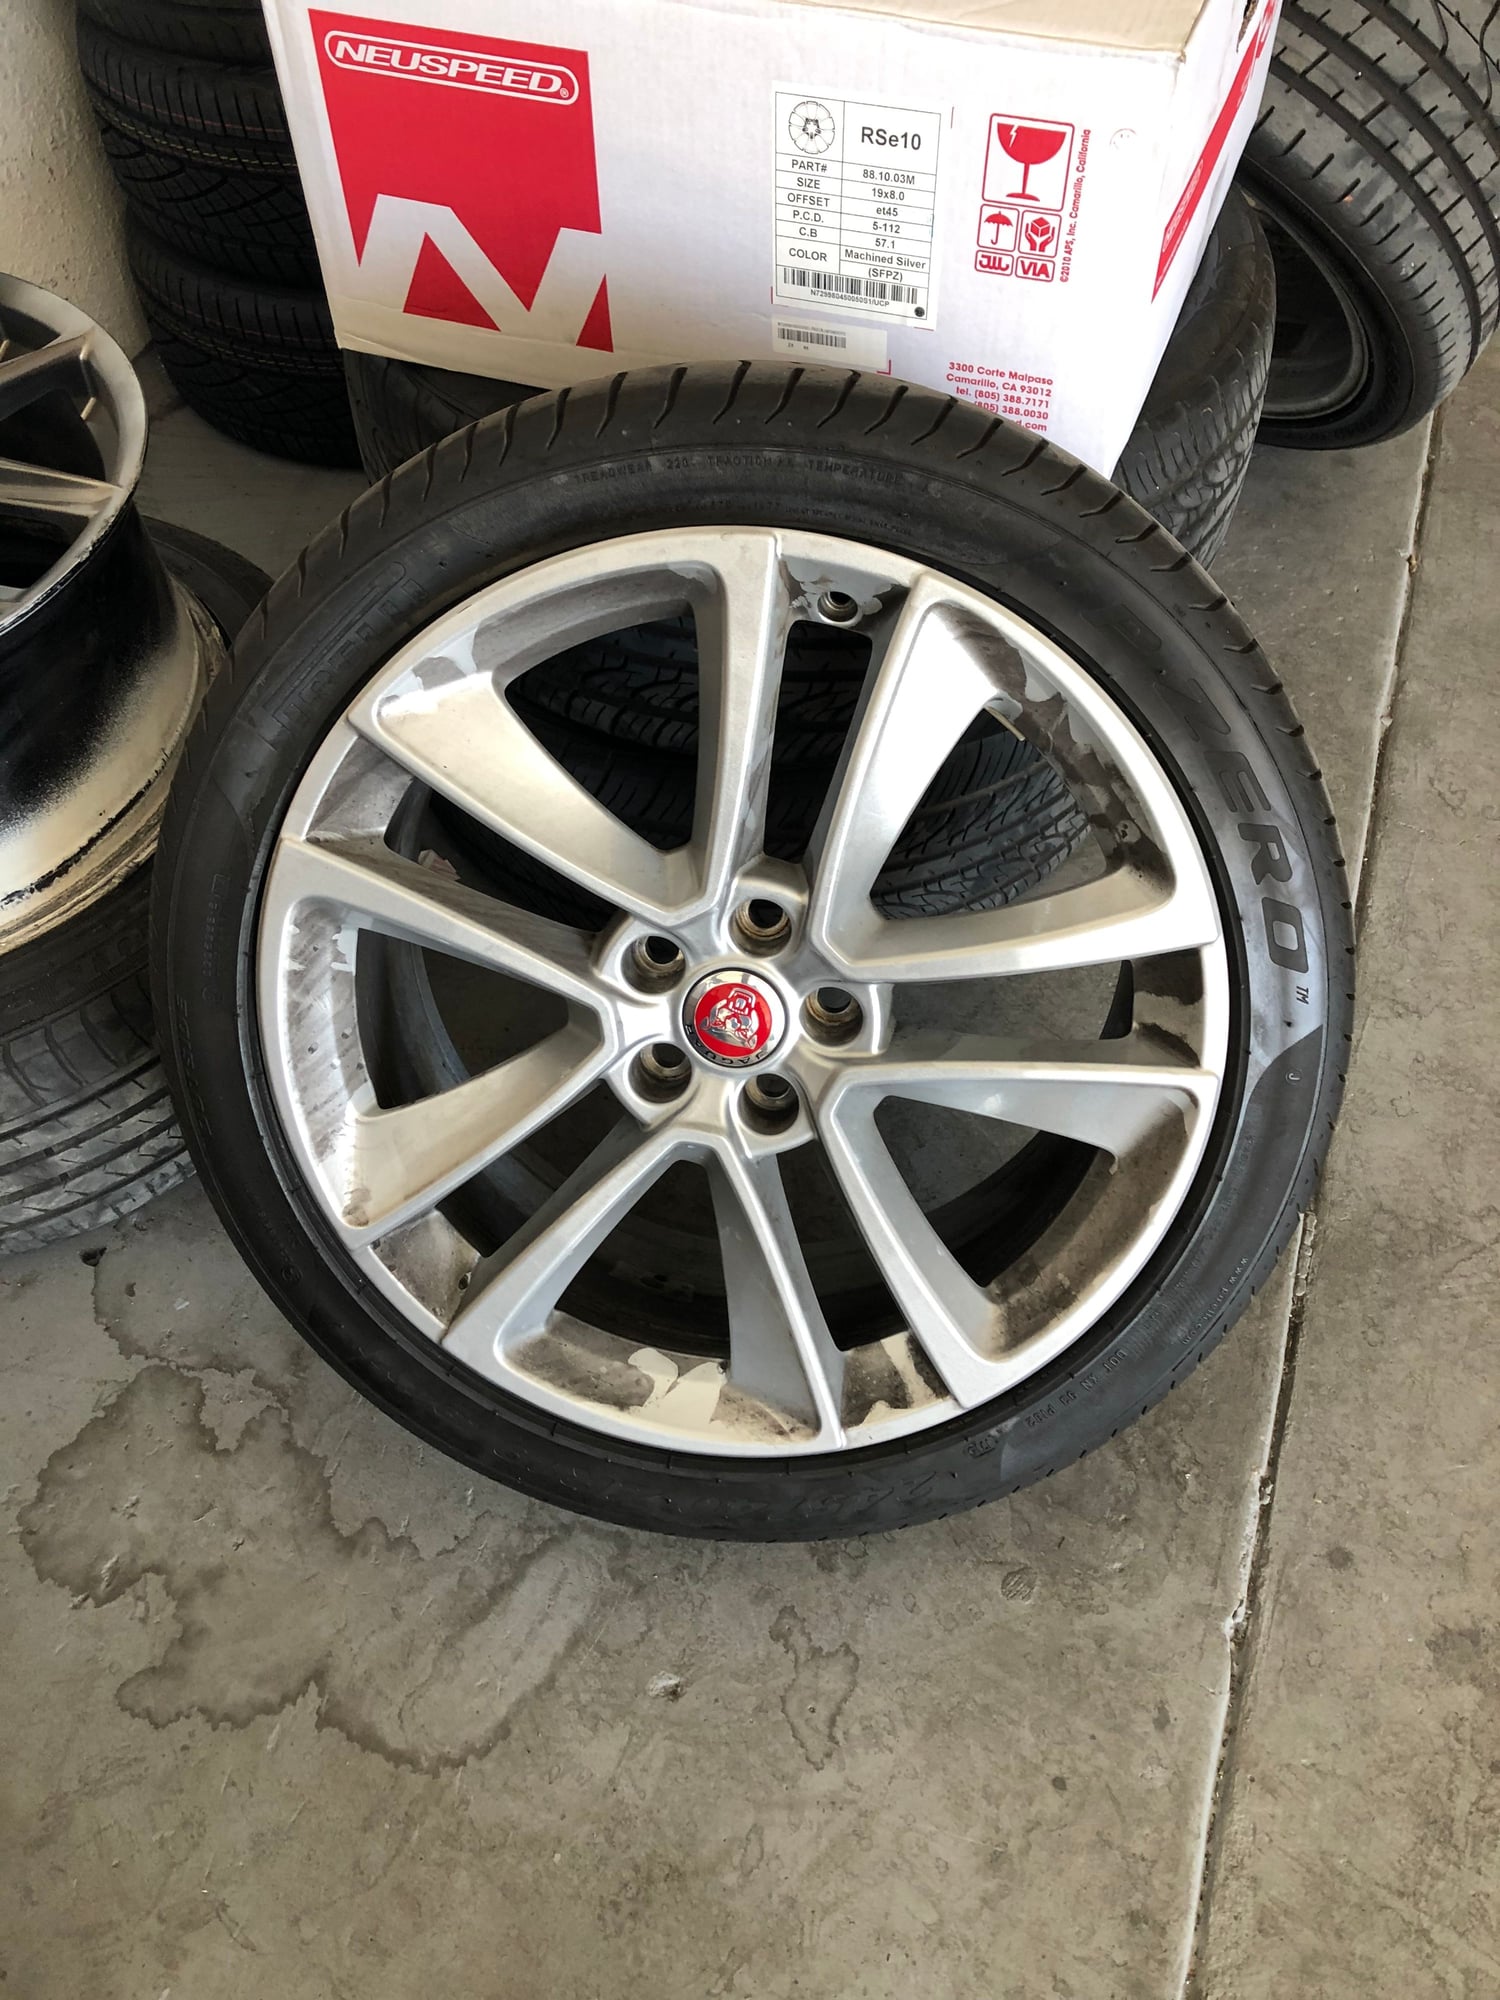 Wheels and Tires/Axles - 19" Wheels, caps and tires-$600 - New - All Years Jaguar F-Type - Reno, NV 89502, United States